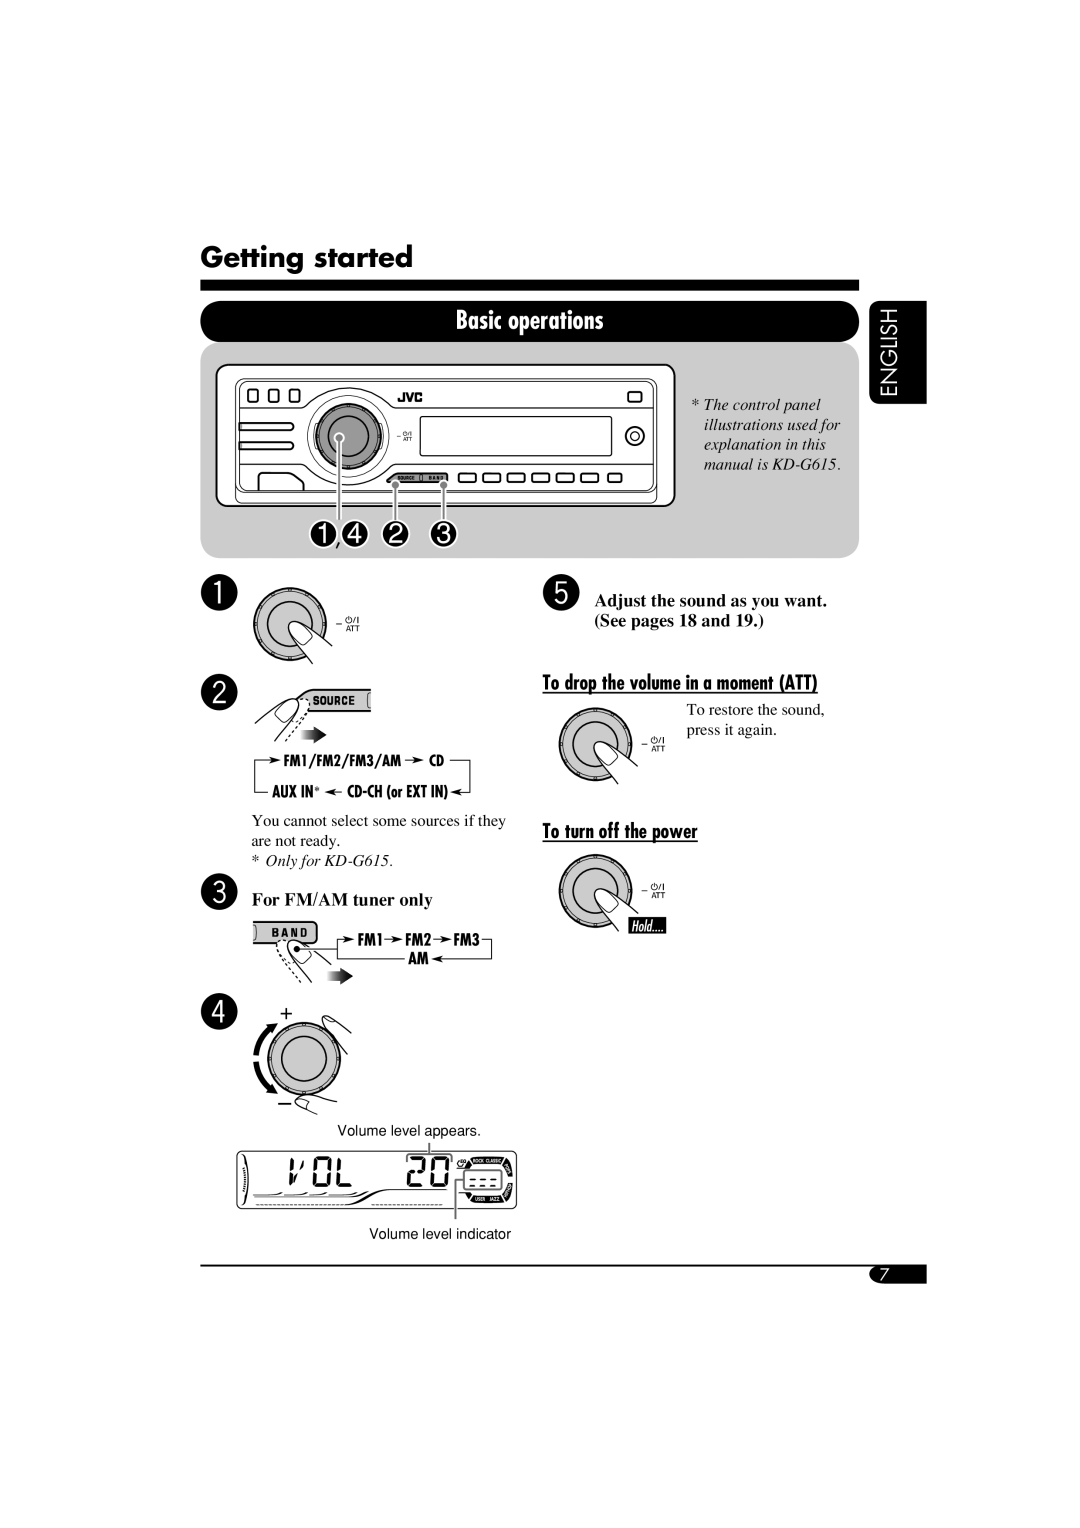 JVC KD-G515 manual Getting started, Basic operations, To drop the volume in a moment ATT, To turn off the power, English 